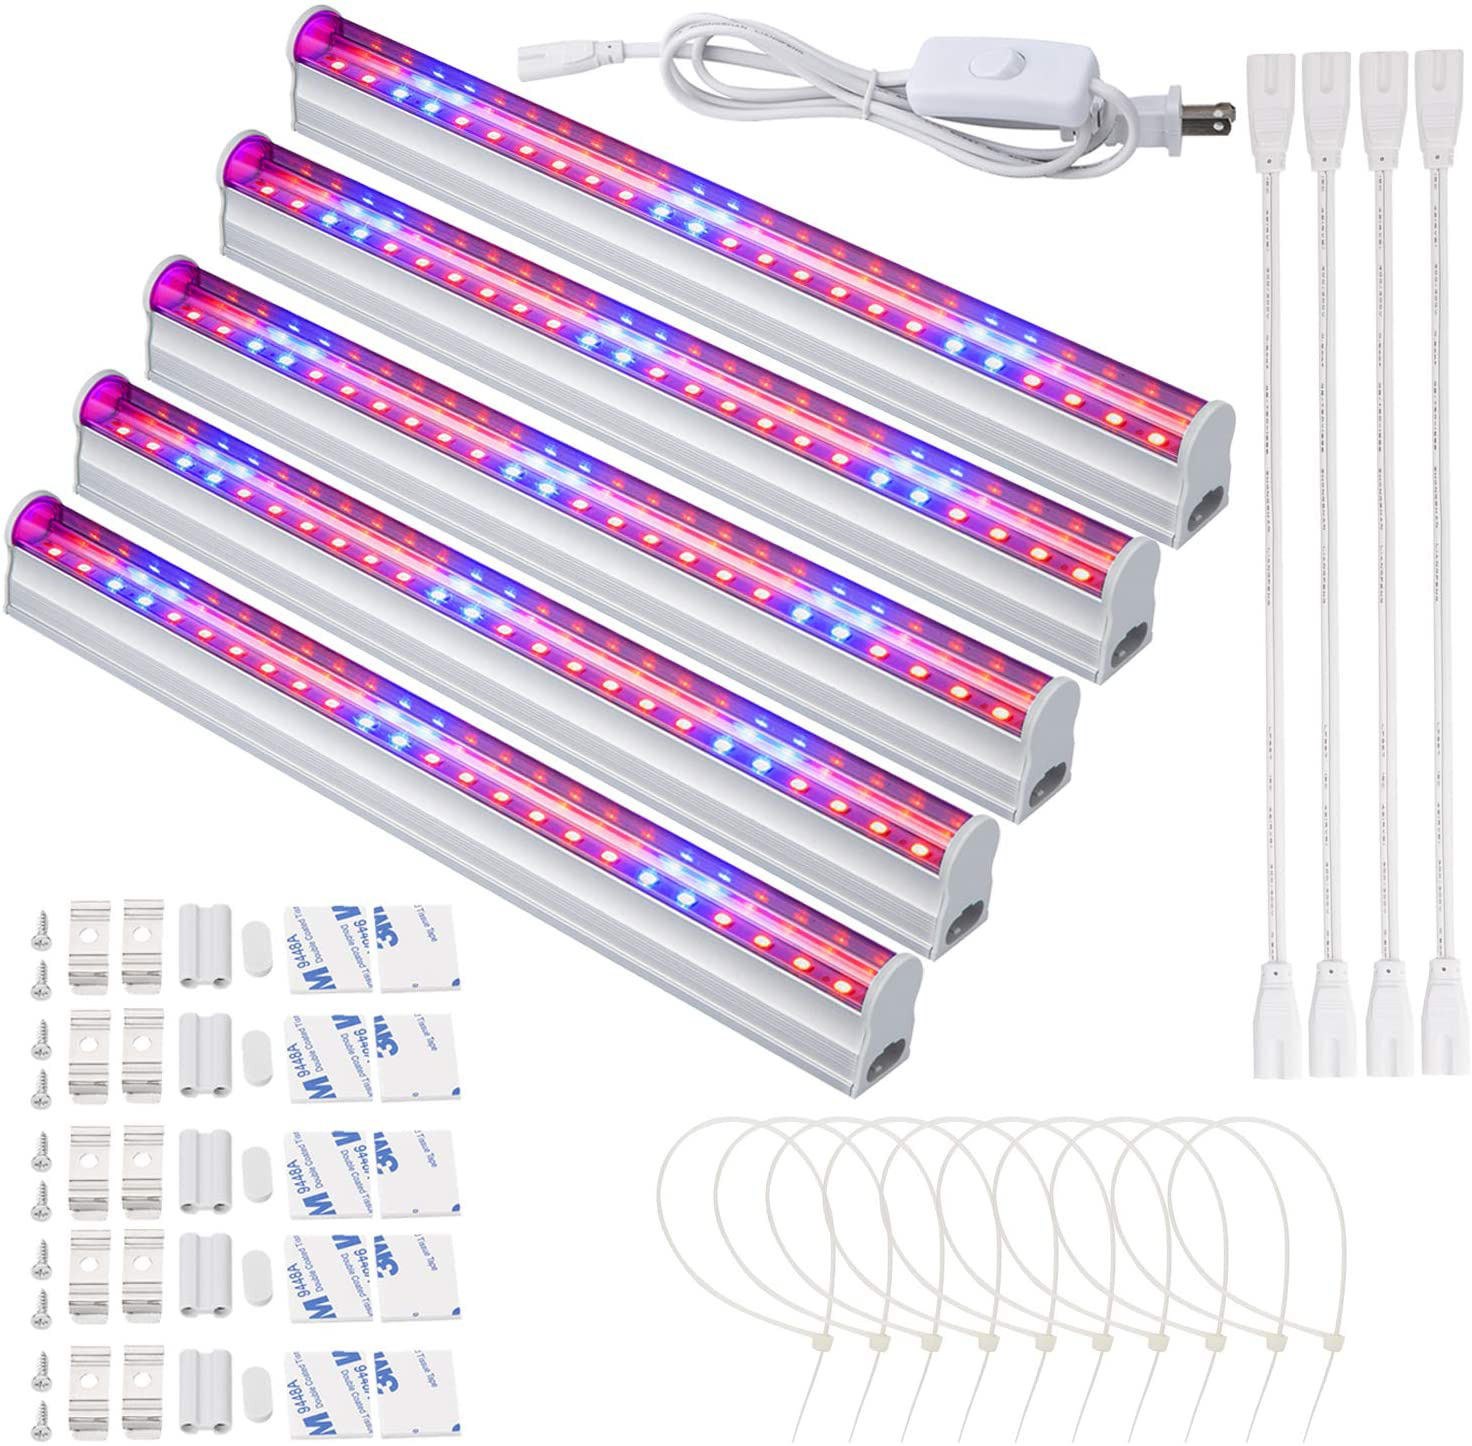 HOPLOM LED Grow Light Bars, Plant Grow Lamp for Indoor Plants with Red/Blue Spec